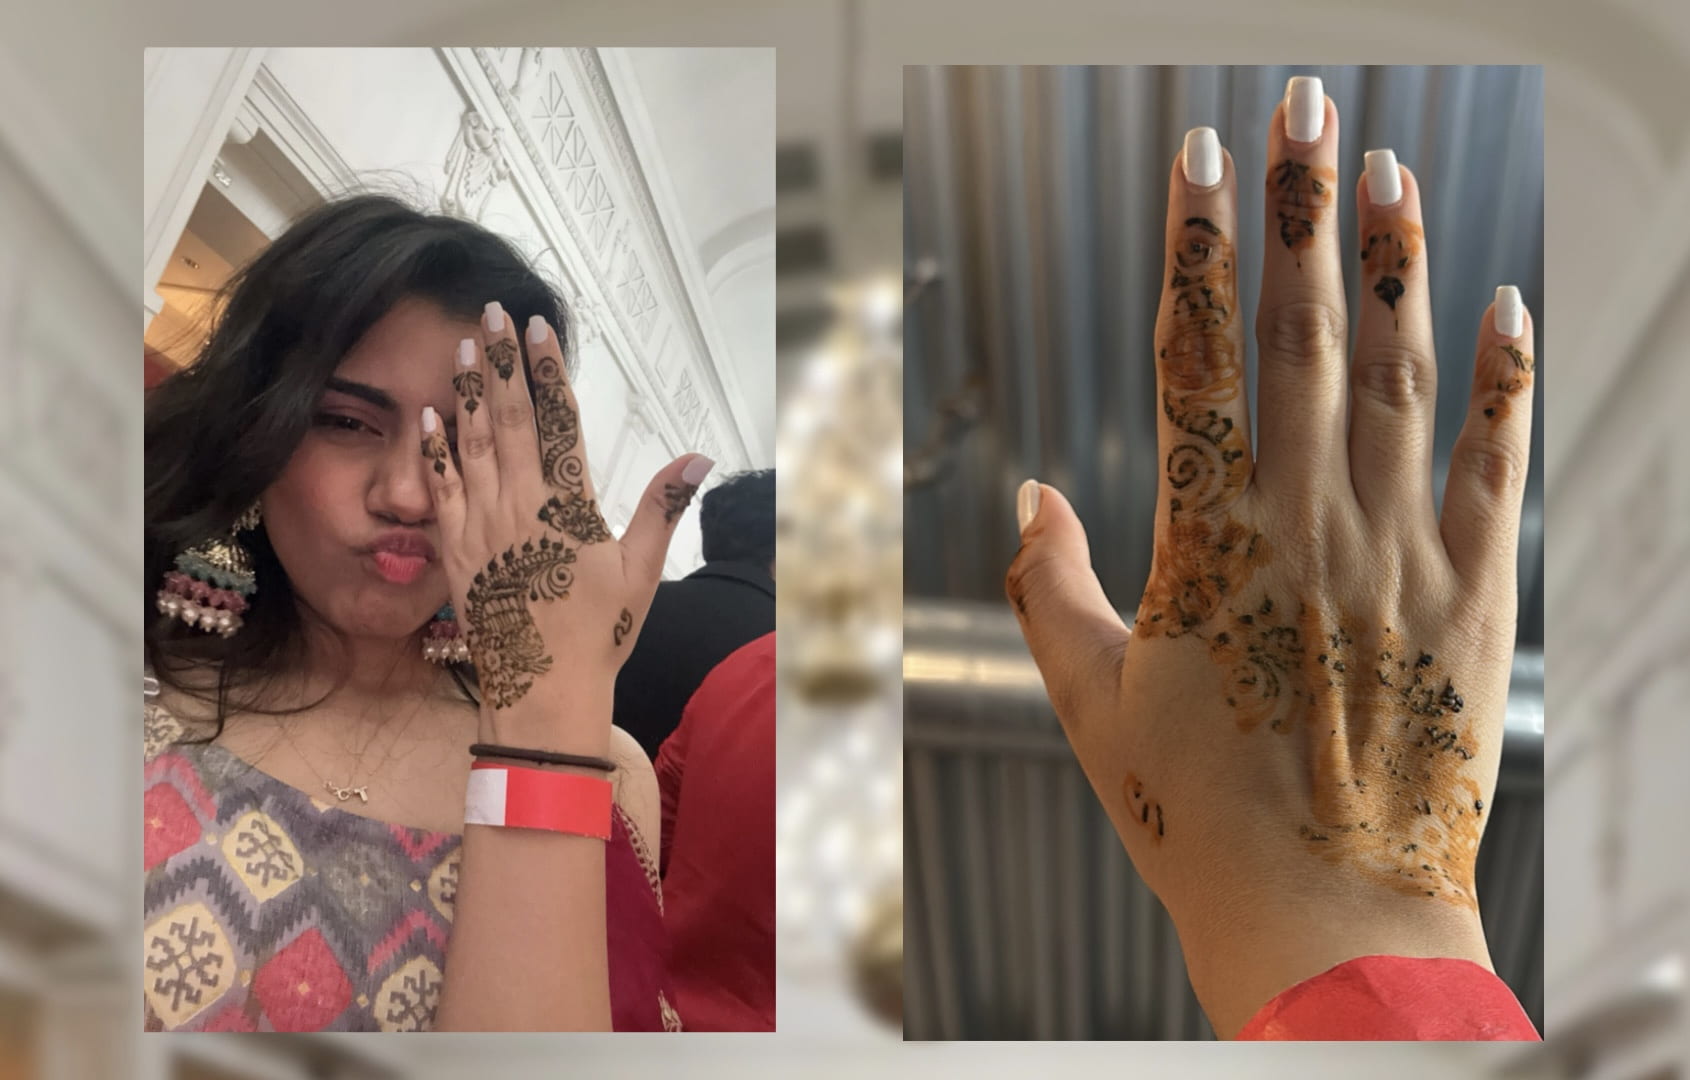 Two images of Hand-Henna Art.